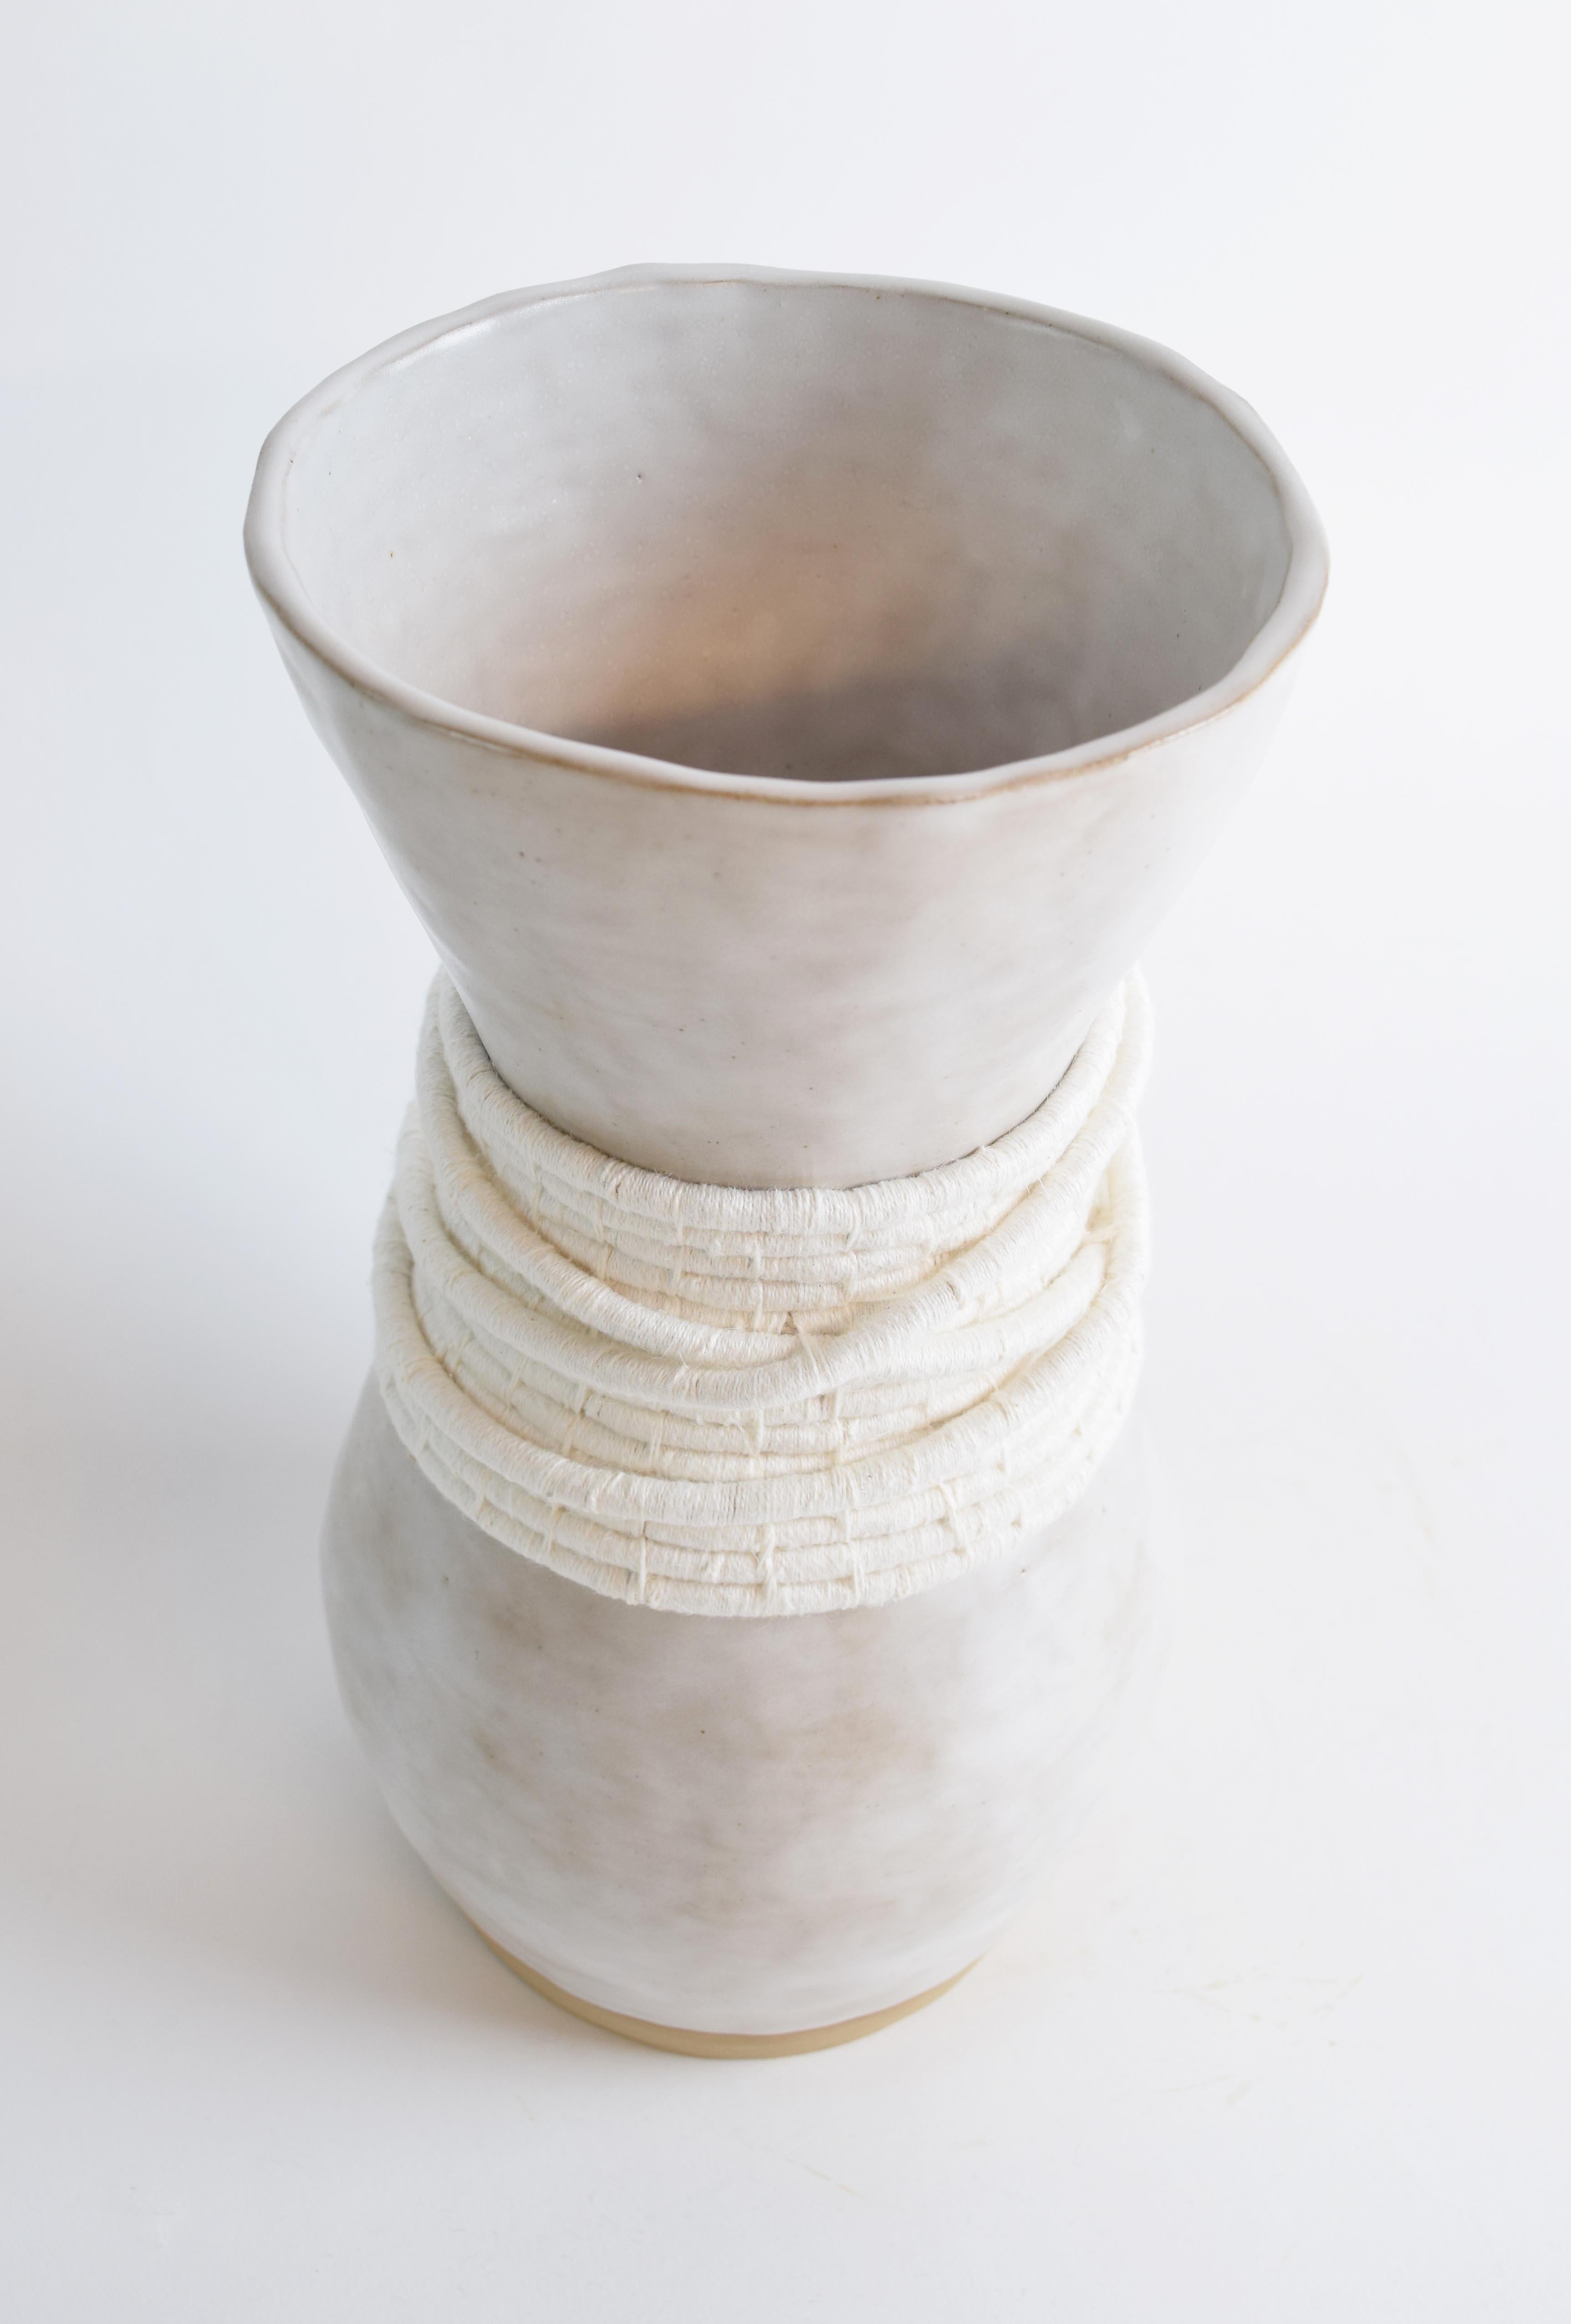 Organic Modern One of a Kind Ceramic & Fiber Vase #809  - White Glaze with Woven White Cotton For Sale